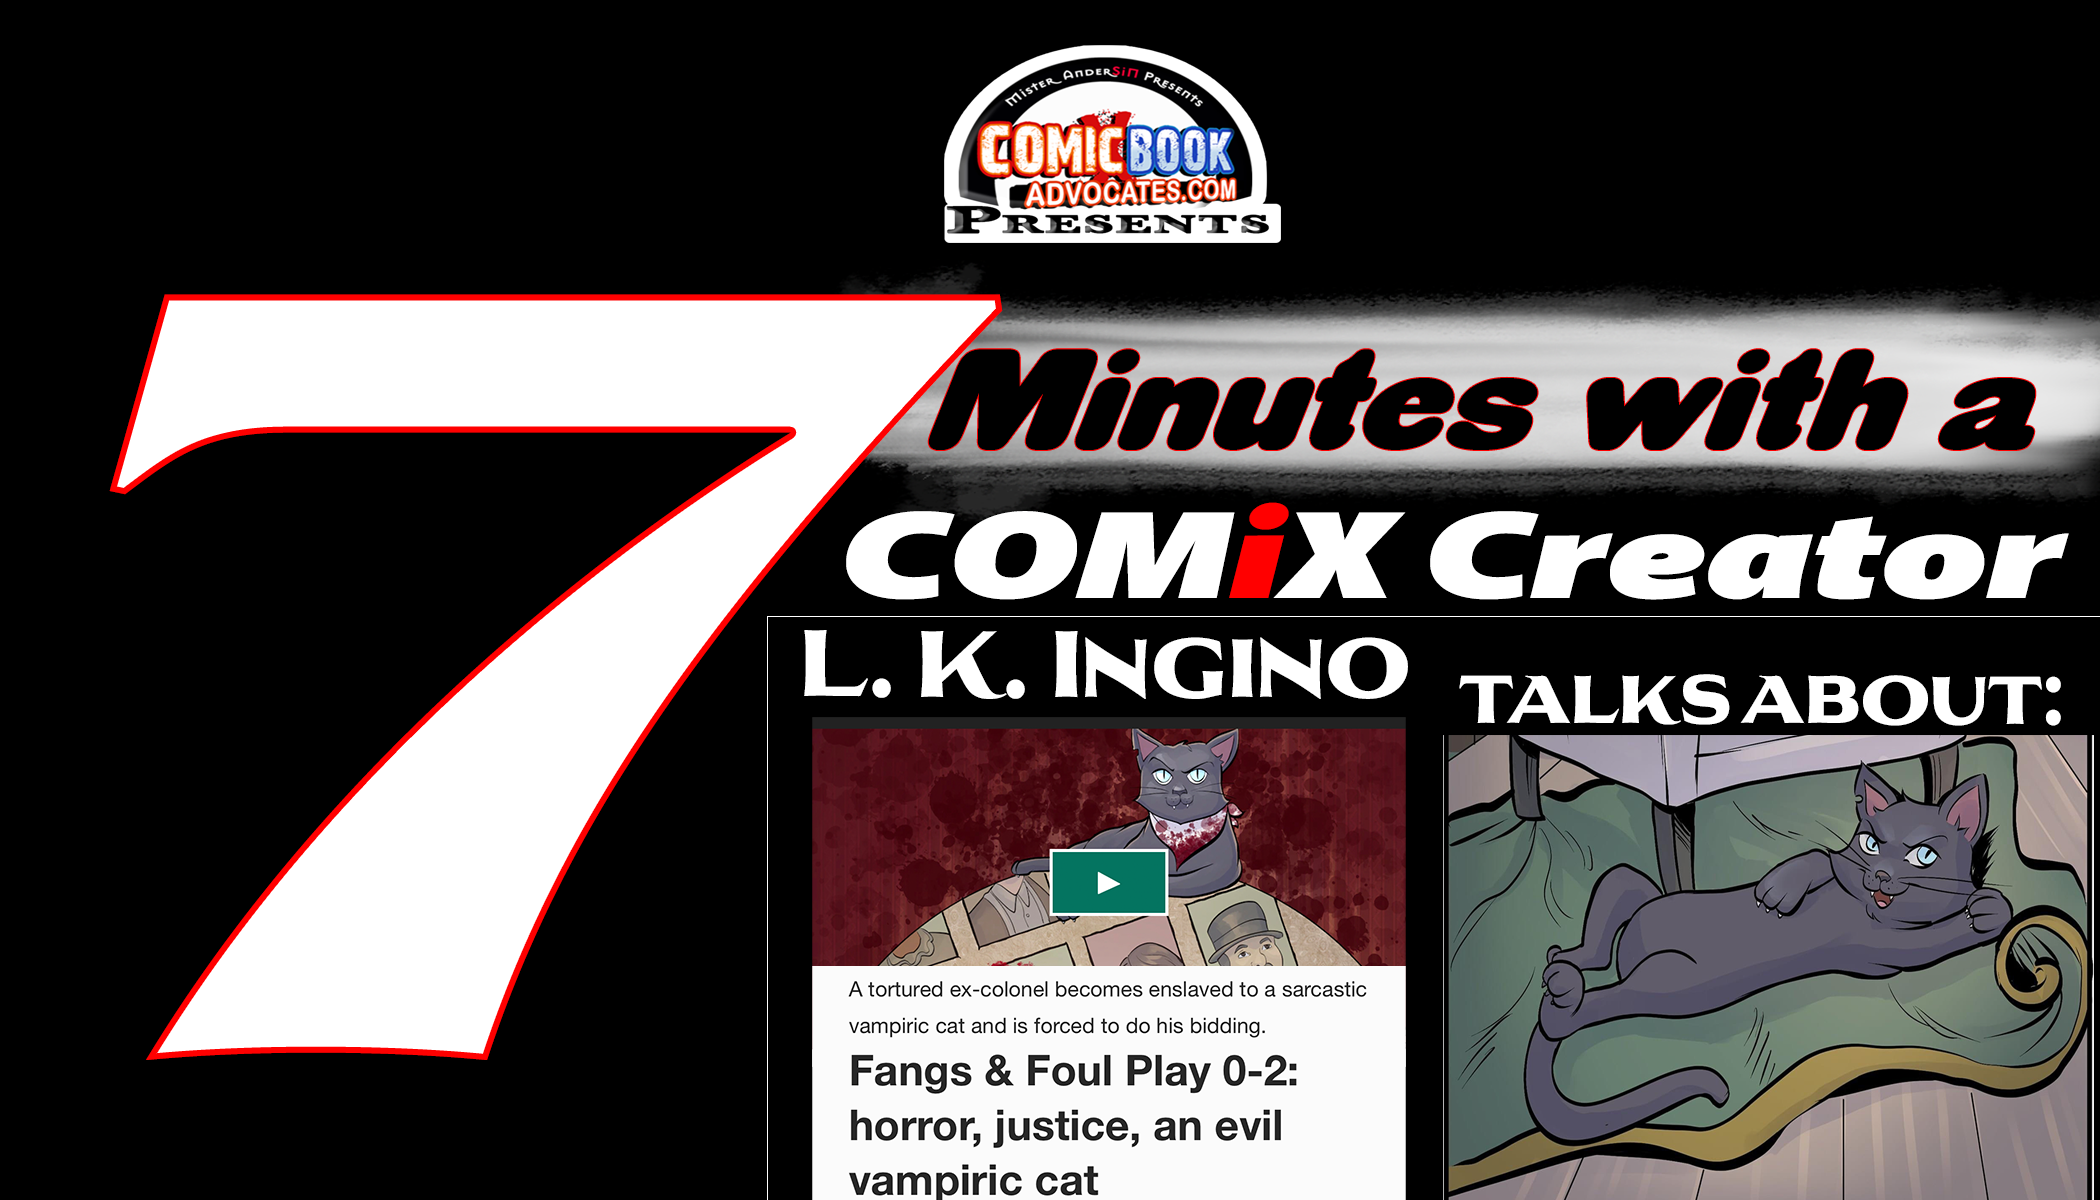 L. K. Ingino has 7 mins to sell you on Fangs & Foul Play